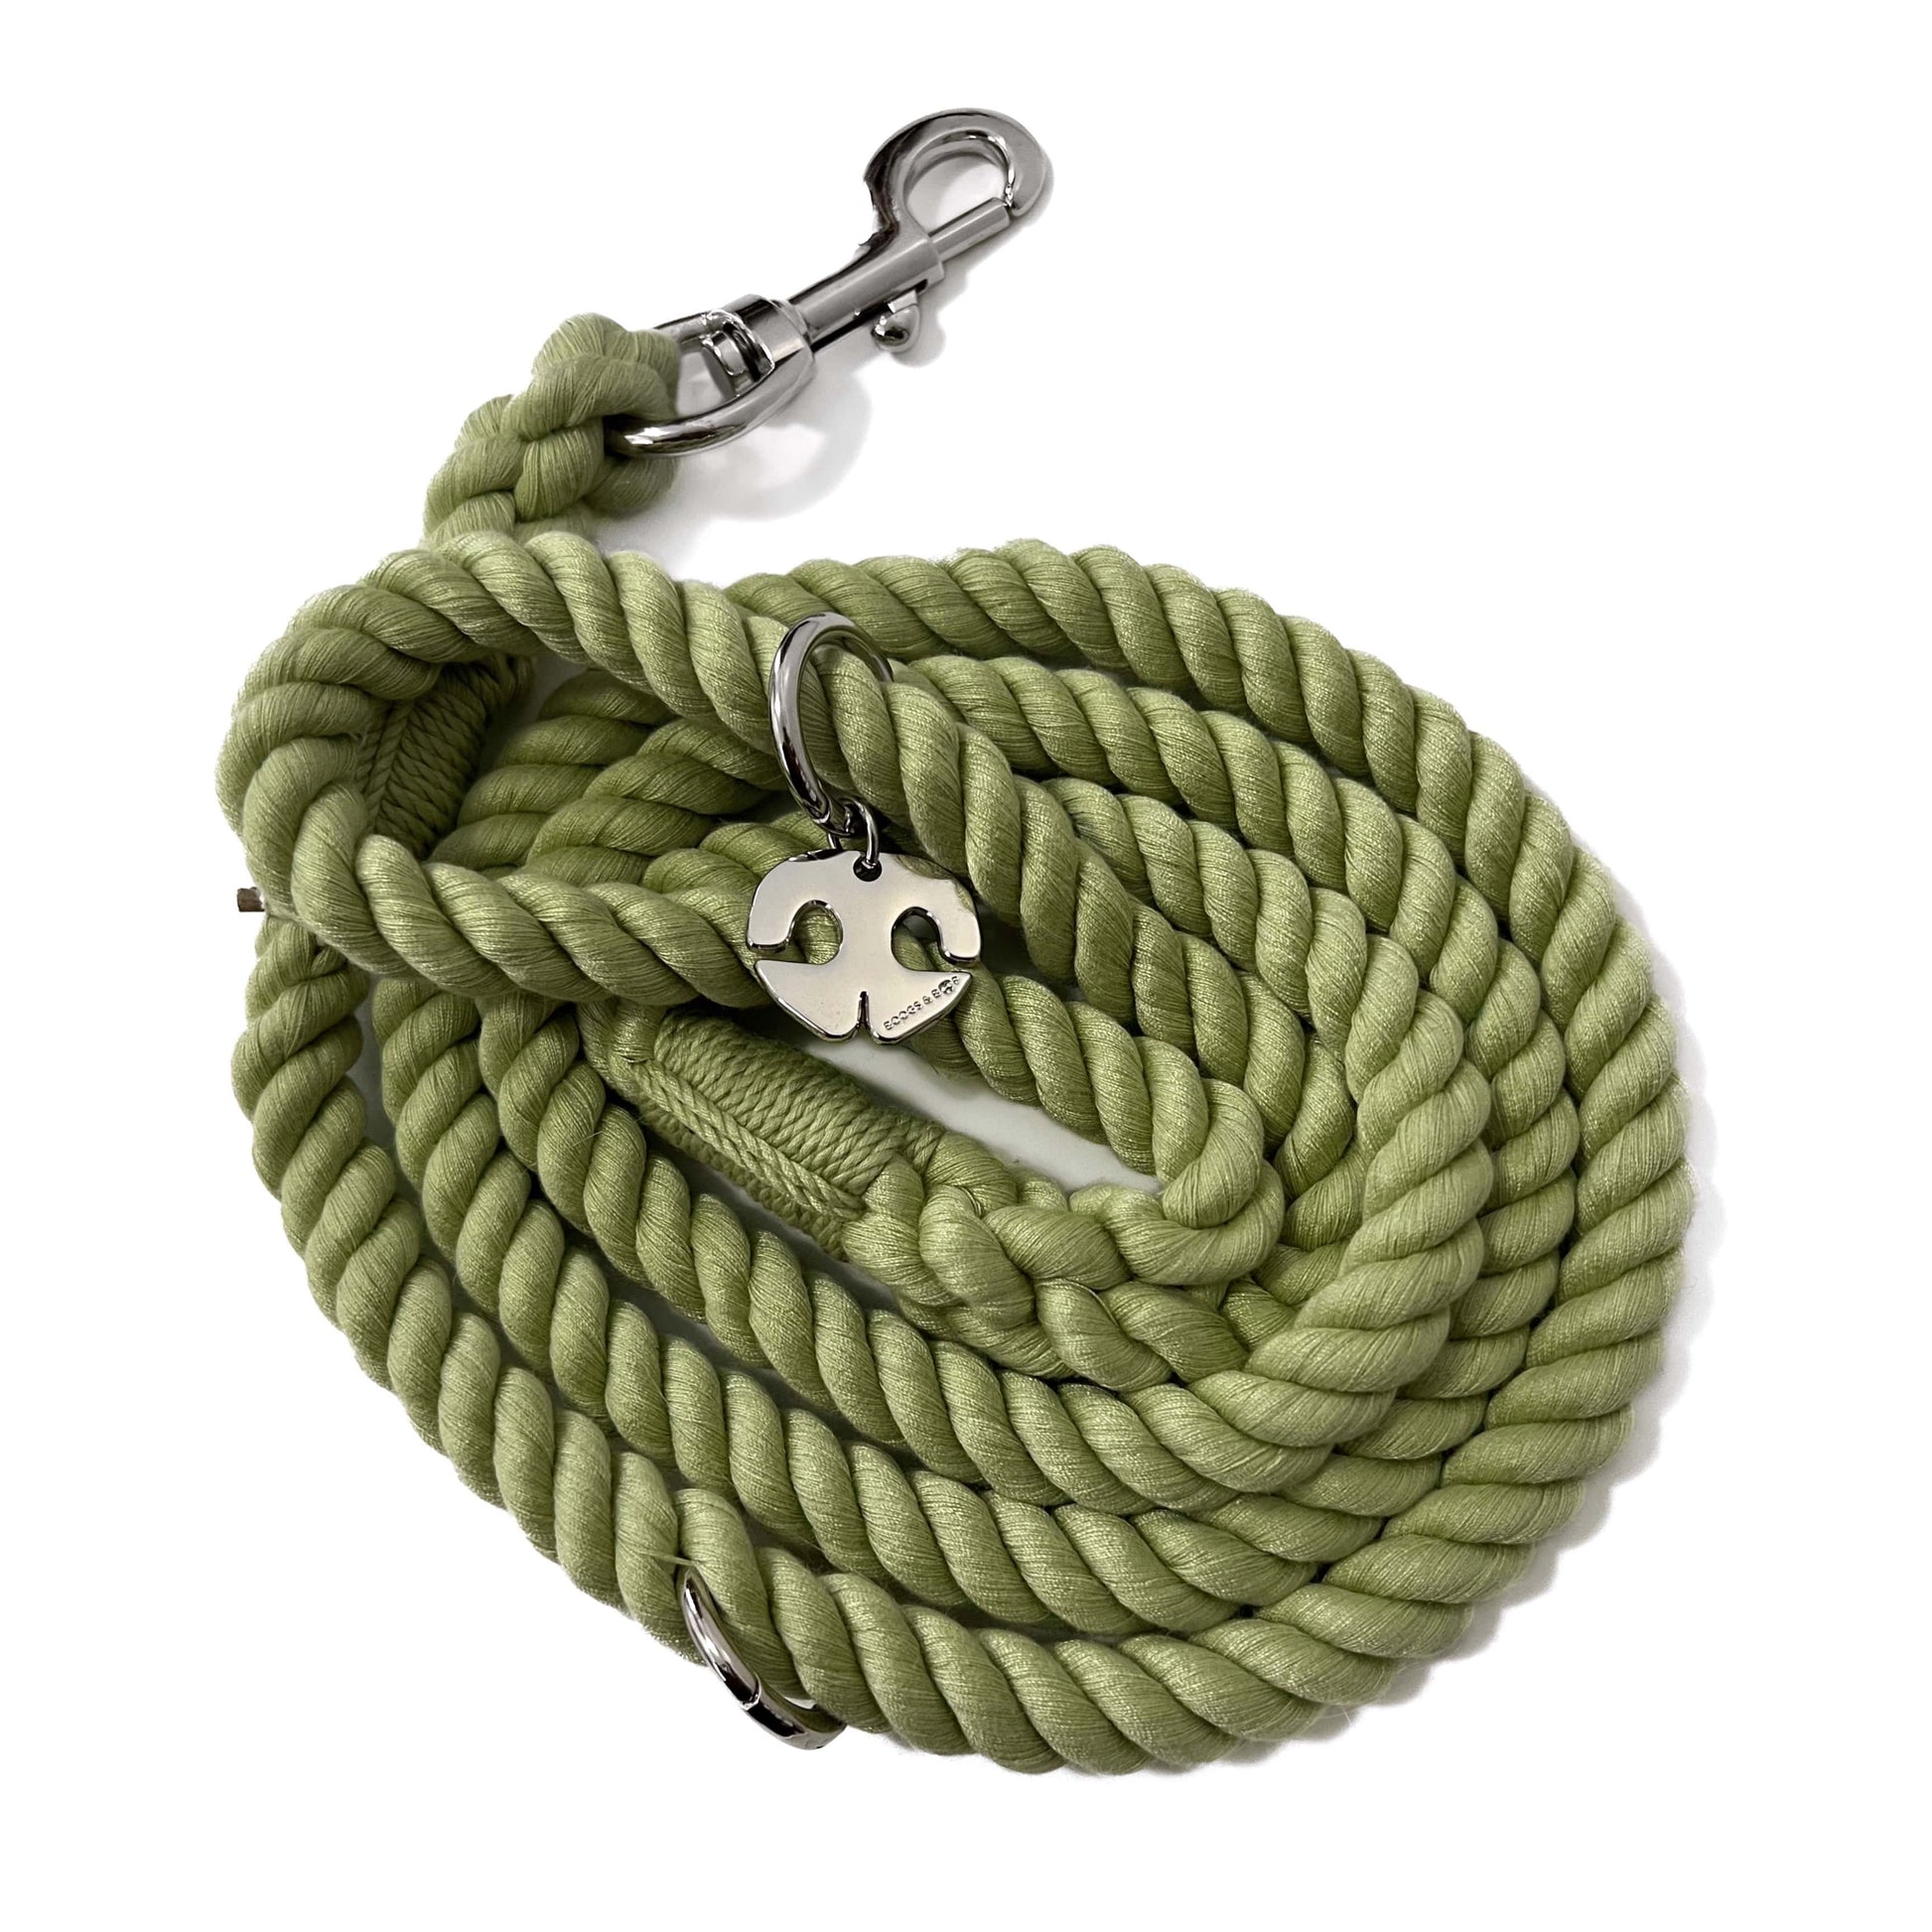 Shop Rope Leash - Sage Green by Boogs & Boop.